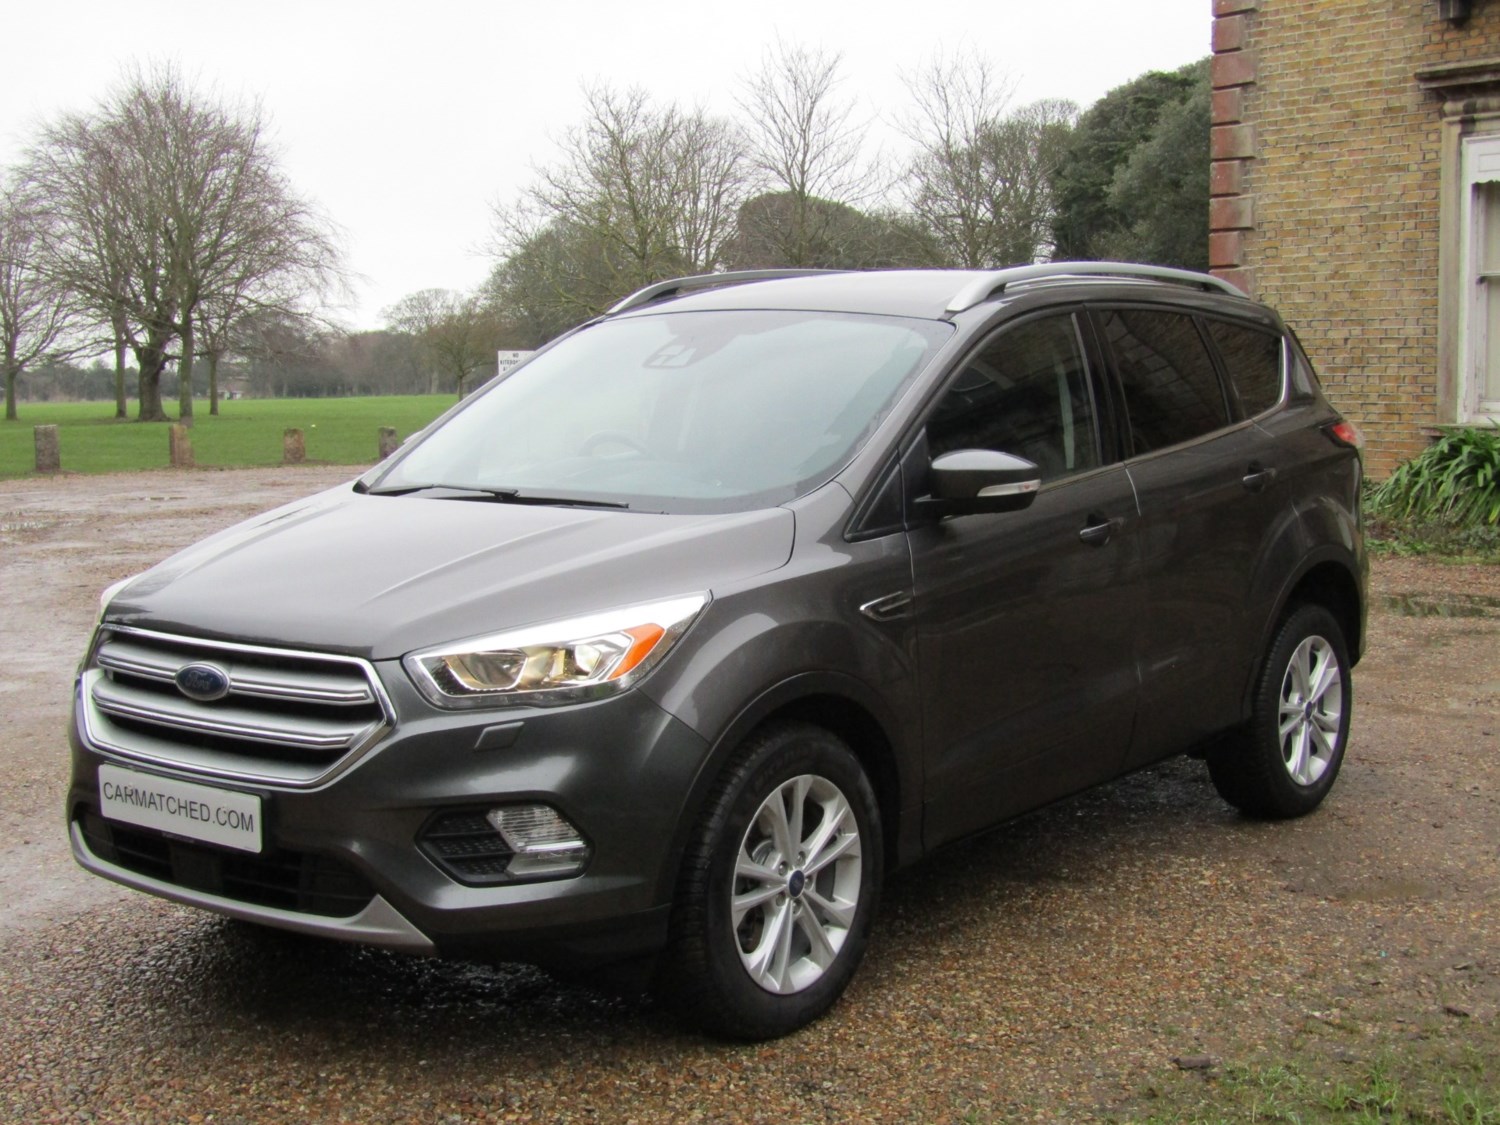 2017 (17) Ford Kuga 1.5 TDCi Titanium 5dr 2WD For Sale In Broadstairs, Kent